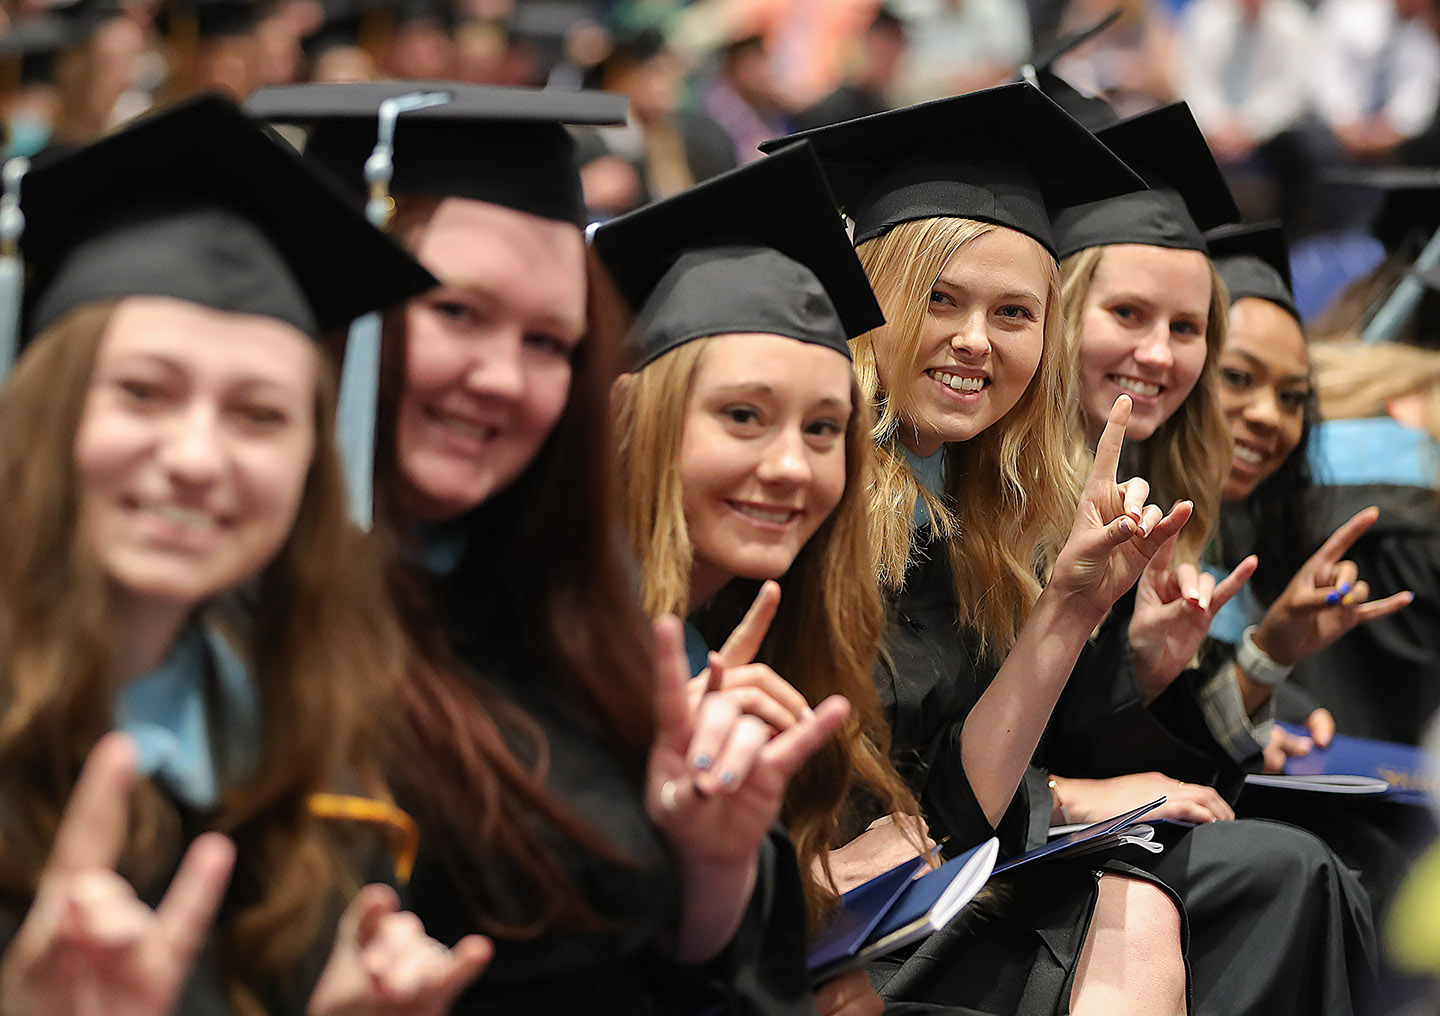 Sydney Hansen of Minden, third from right, received her second degree from UNK during Friday’s spring commencement ceremony. She graduated with a master’s degree in elementary school counseling. (Photos by Erika Pritchard, UNK Communications)